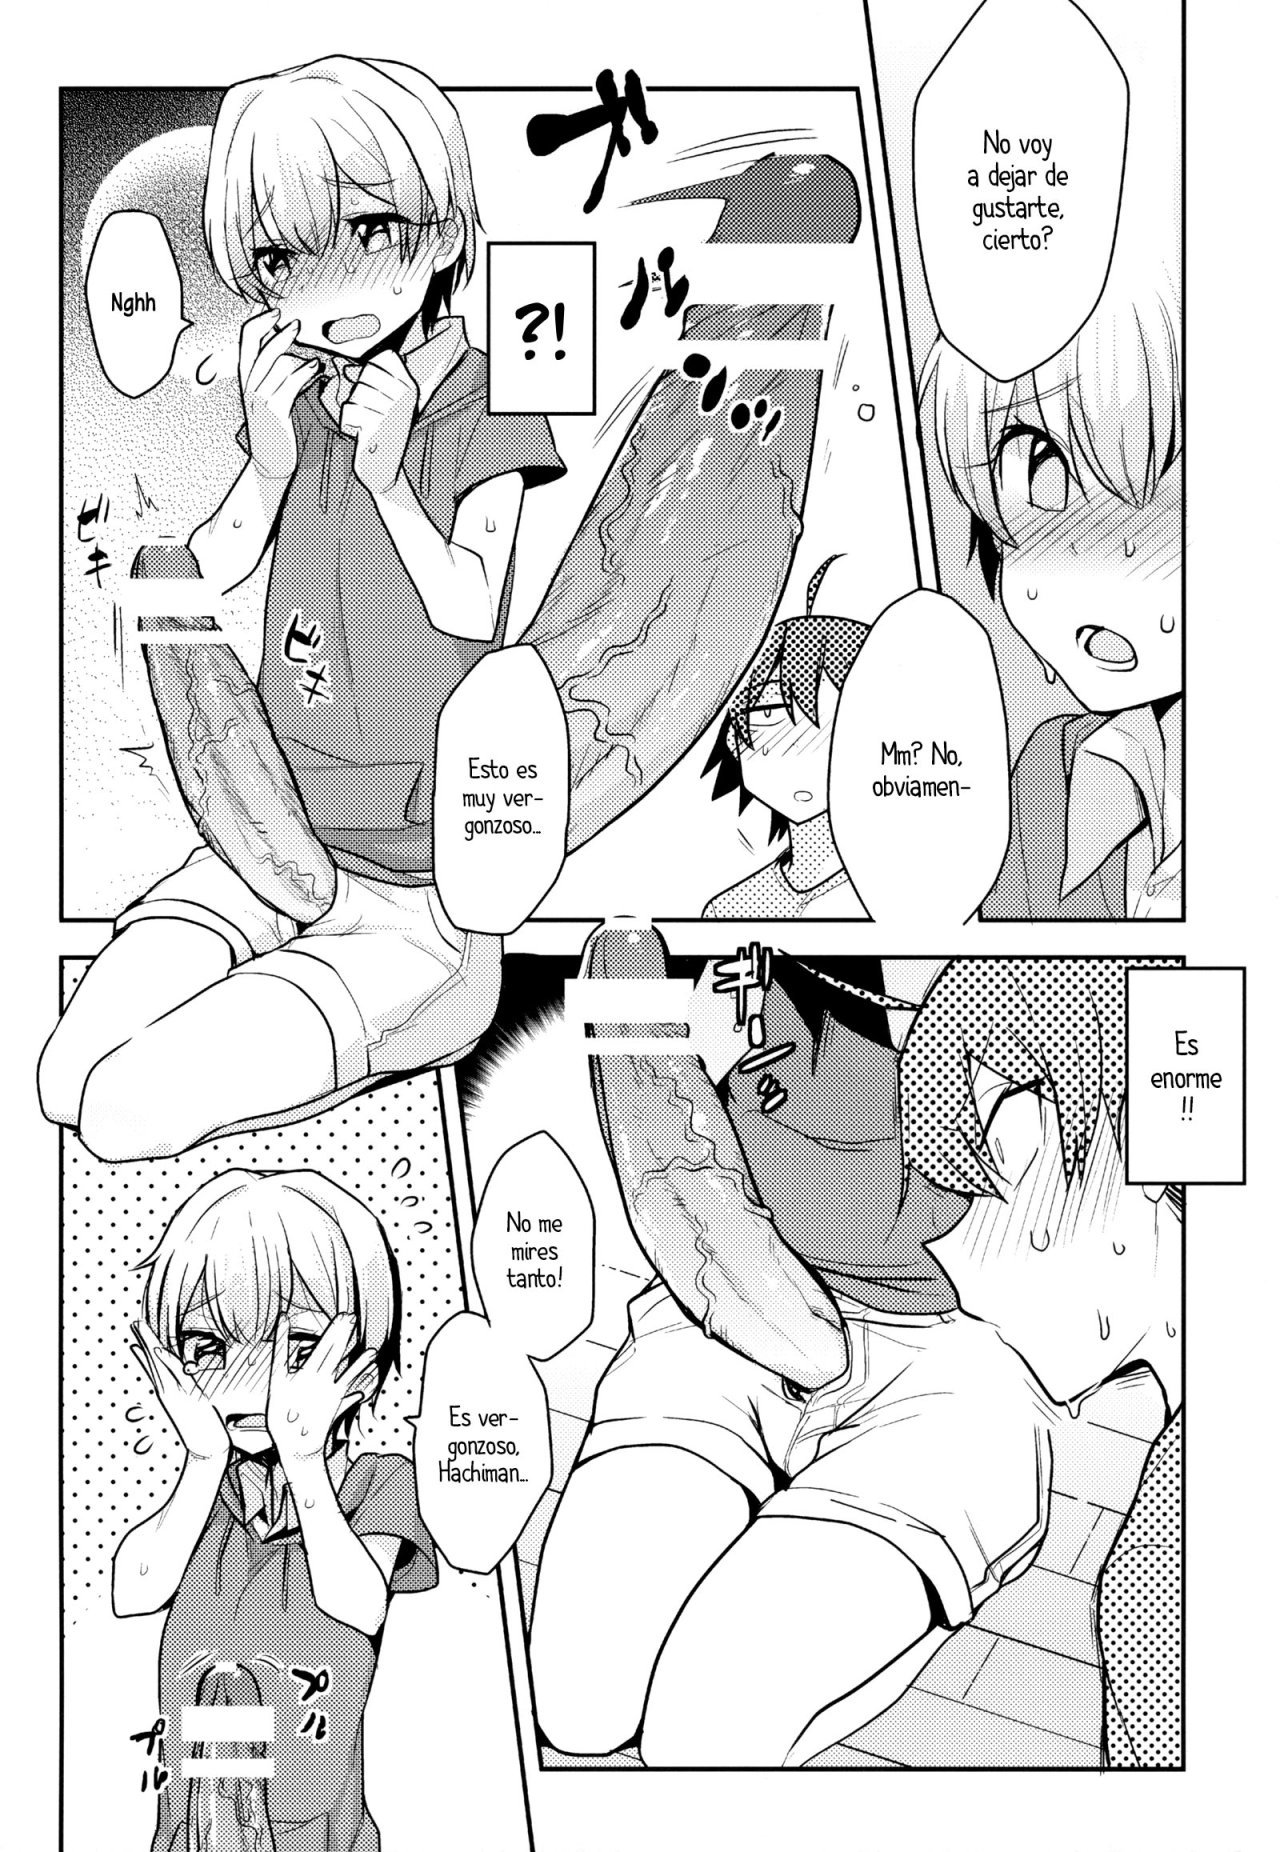 Cute Angel Totsuka Turns Hachiman Into His Bitch With His Elephant Cock - extra 2 - 6